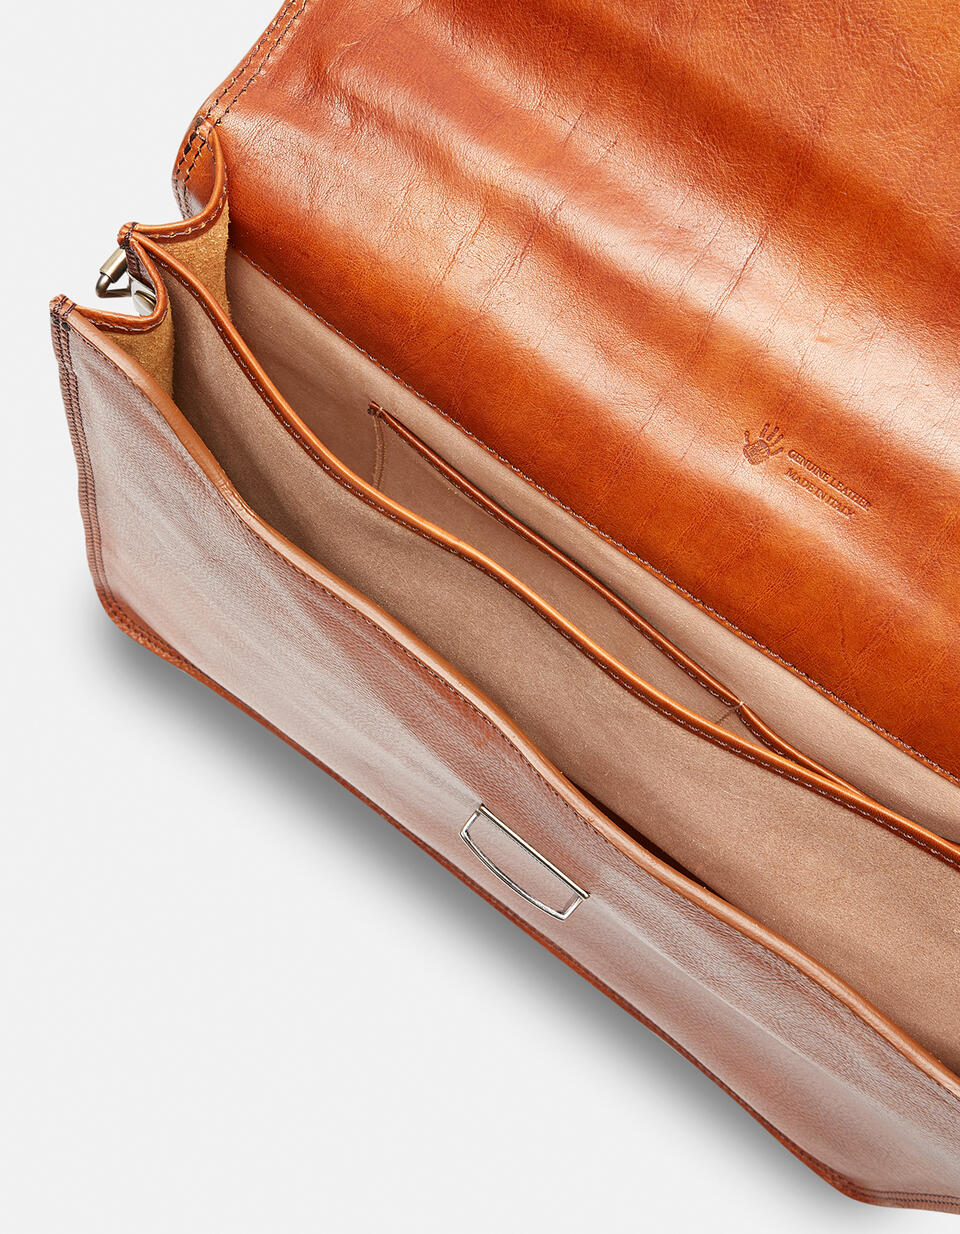 Tanned vegetable leather folder - Briefcases and Laptop Bags | Briefcases COGNAC - Briefcases and Laptop Bags | BriefcasesCuoieria Fiorentina